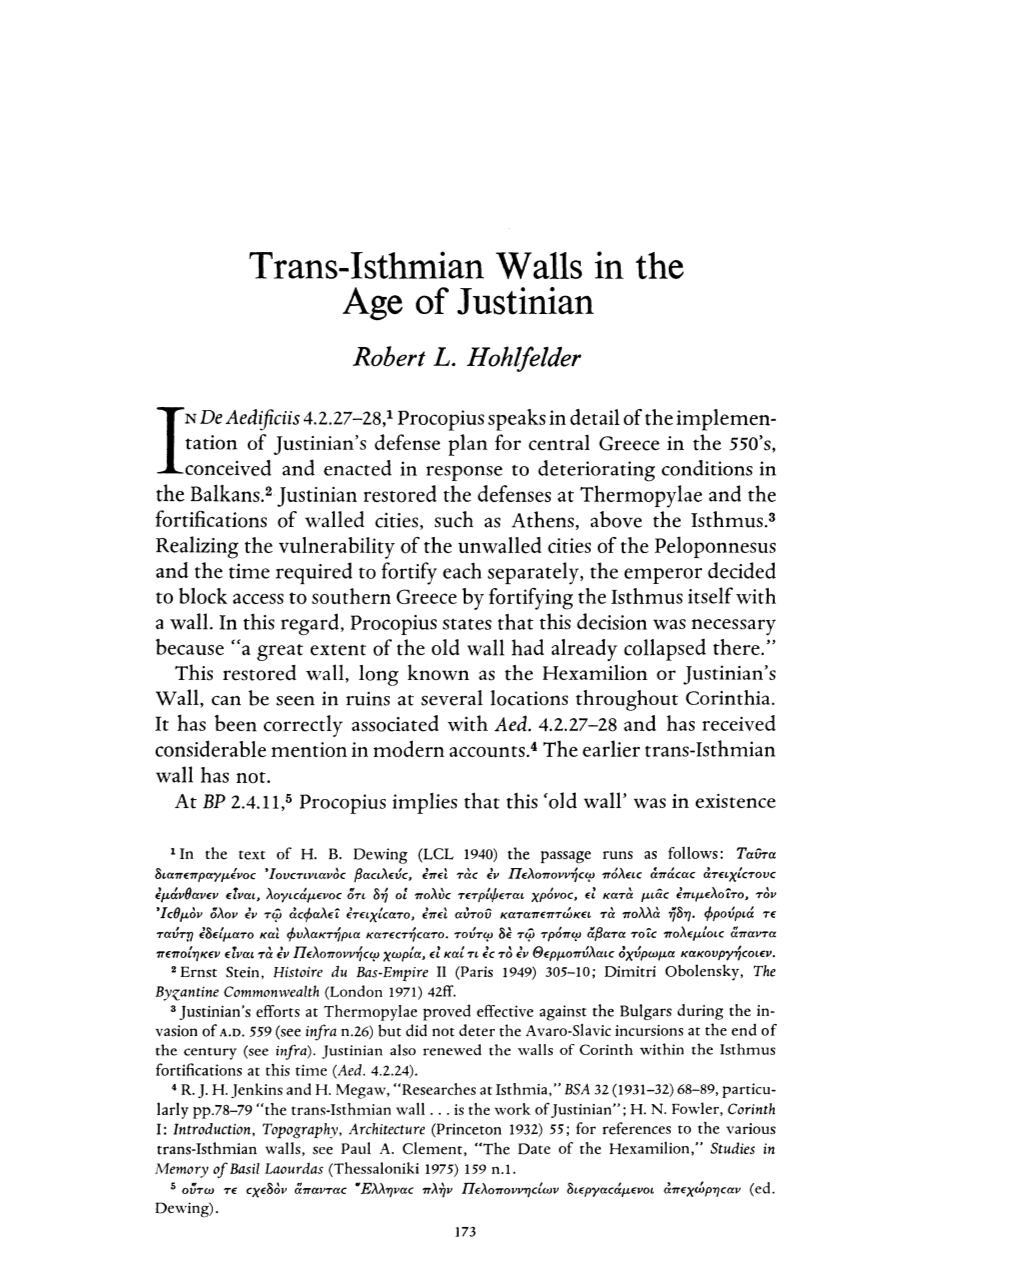 Trans-Isthmian Walls in the Age of Justinian Hohlfelder, Robert L Greek, Roman and Byzantine Studies; Summer 1977; 18, 2; Periodicals Archive Online Pg